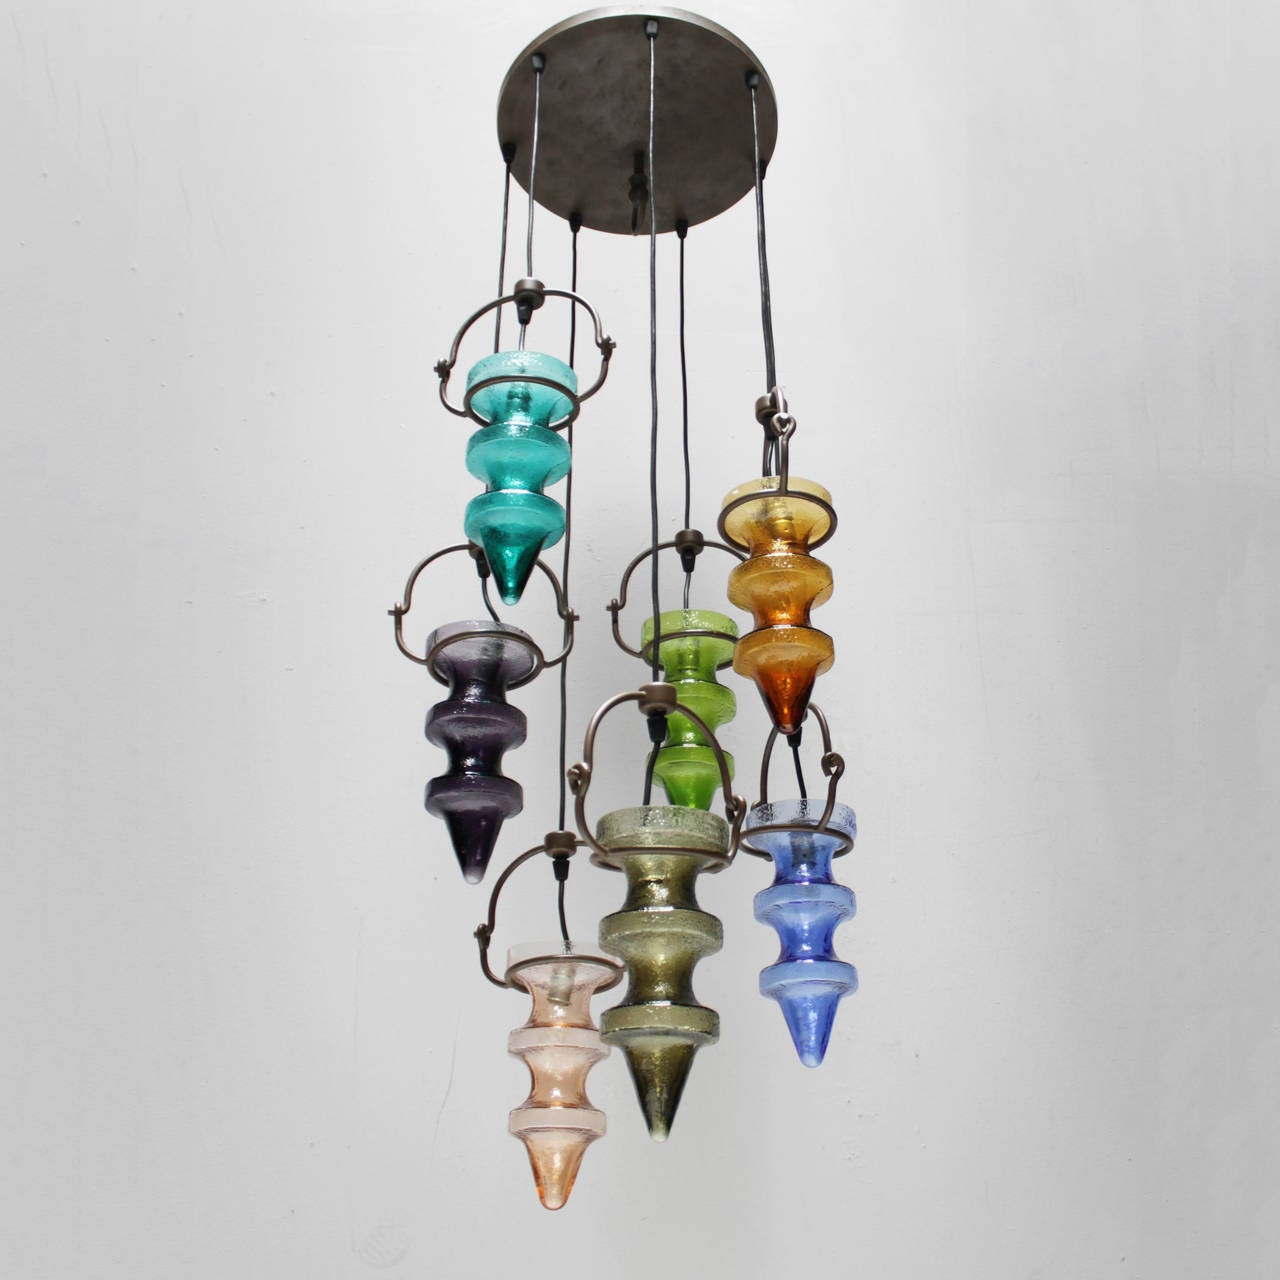 Chandelier stalactites with seven colorful glass pendants by Nanny Still-McKinney for RAAK Amsterdam. Beautiful condition.

Nanny Still McKinney (1926-2009) studied at Finland’s Central School of Arts and Crafts in Helsinki. Already before her